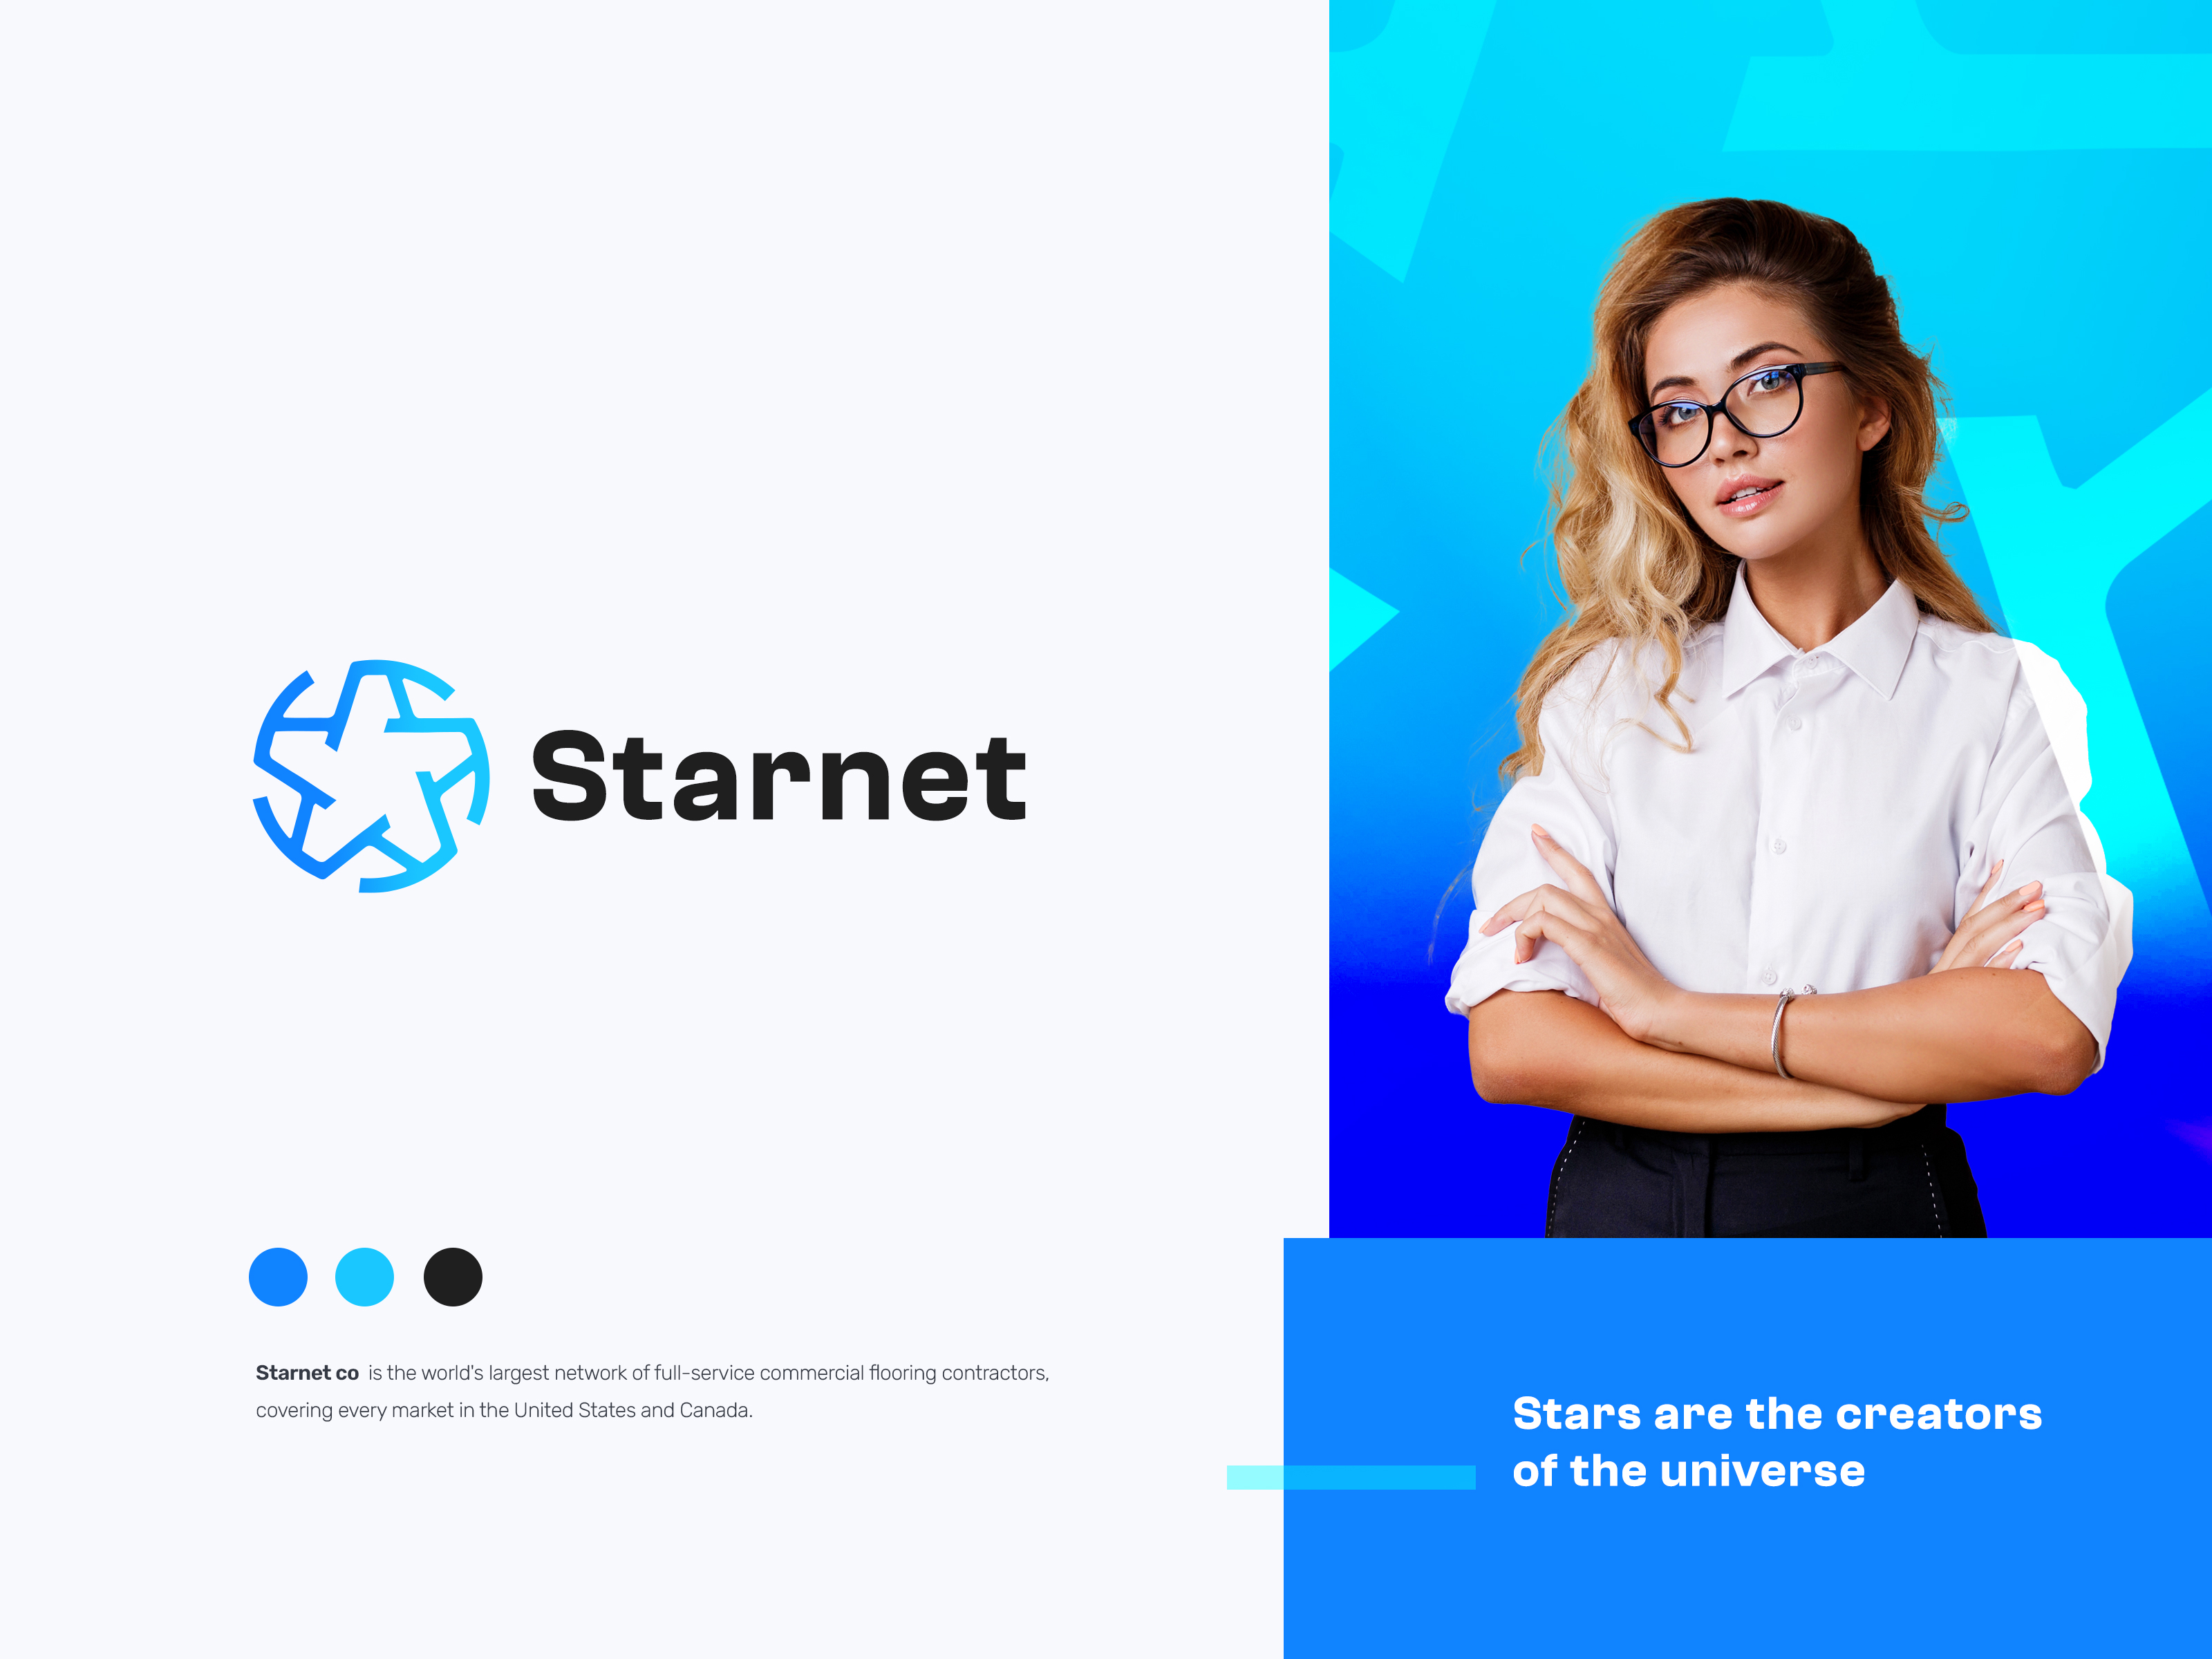 Starnet Logo Design Brand Identity By Saeed Yousefi For Oniex On Dribbble